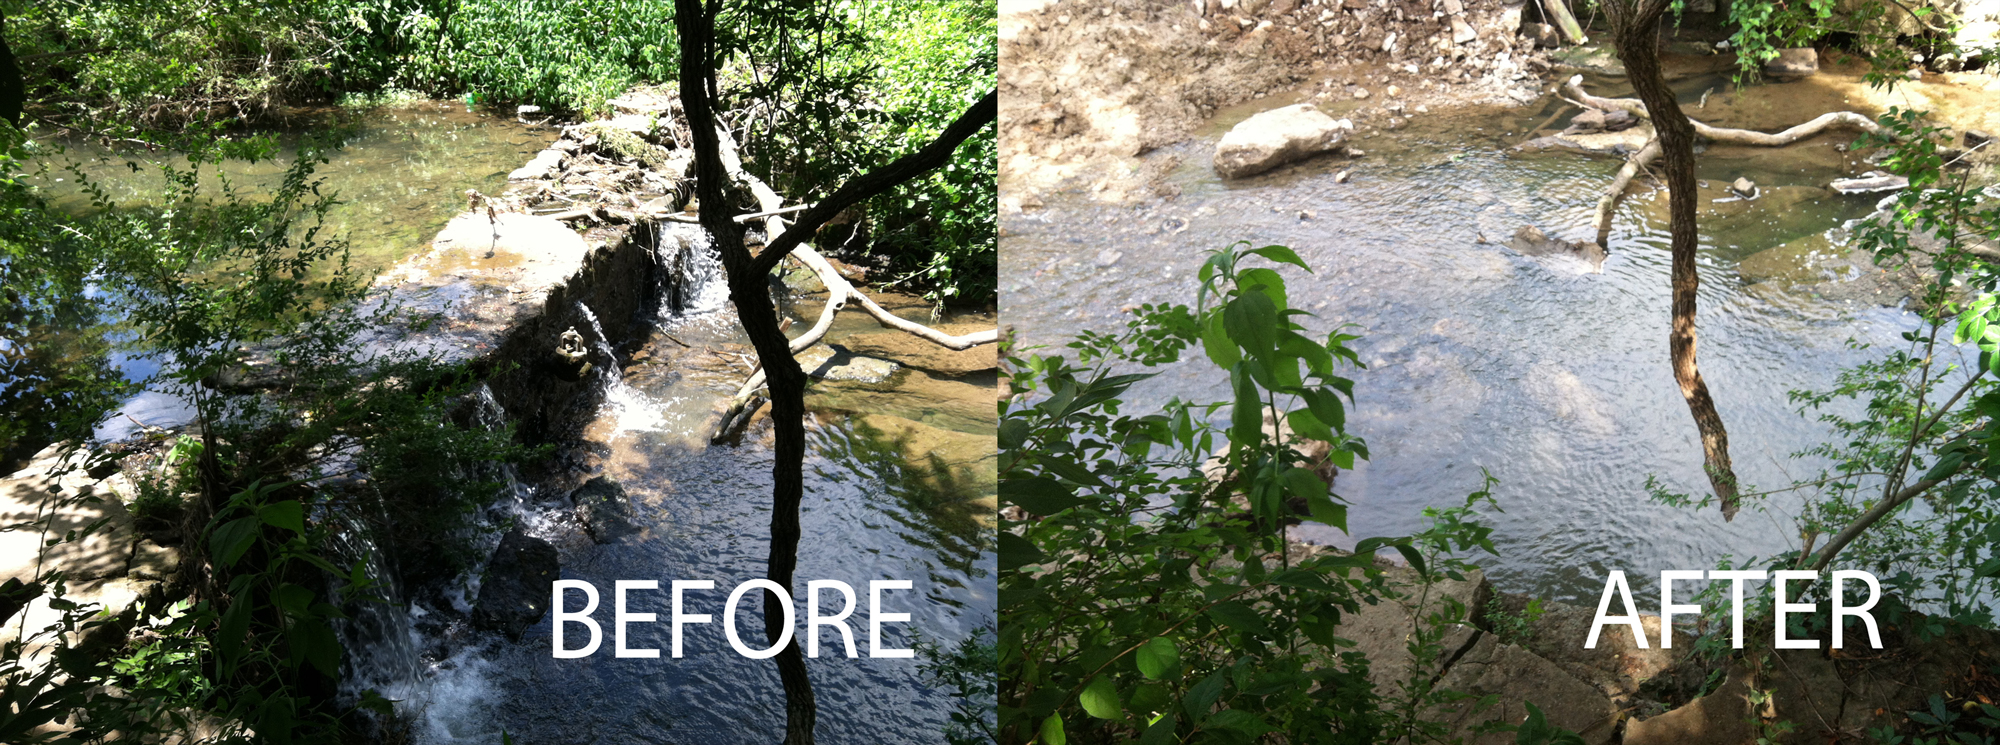 Sevenmile Creek dam before and after removal. Photo © The Nature Conservancy (Paul F. Kingsbury)